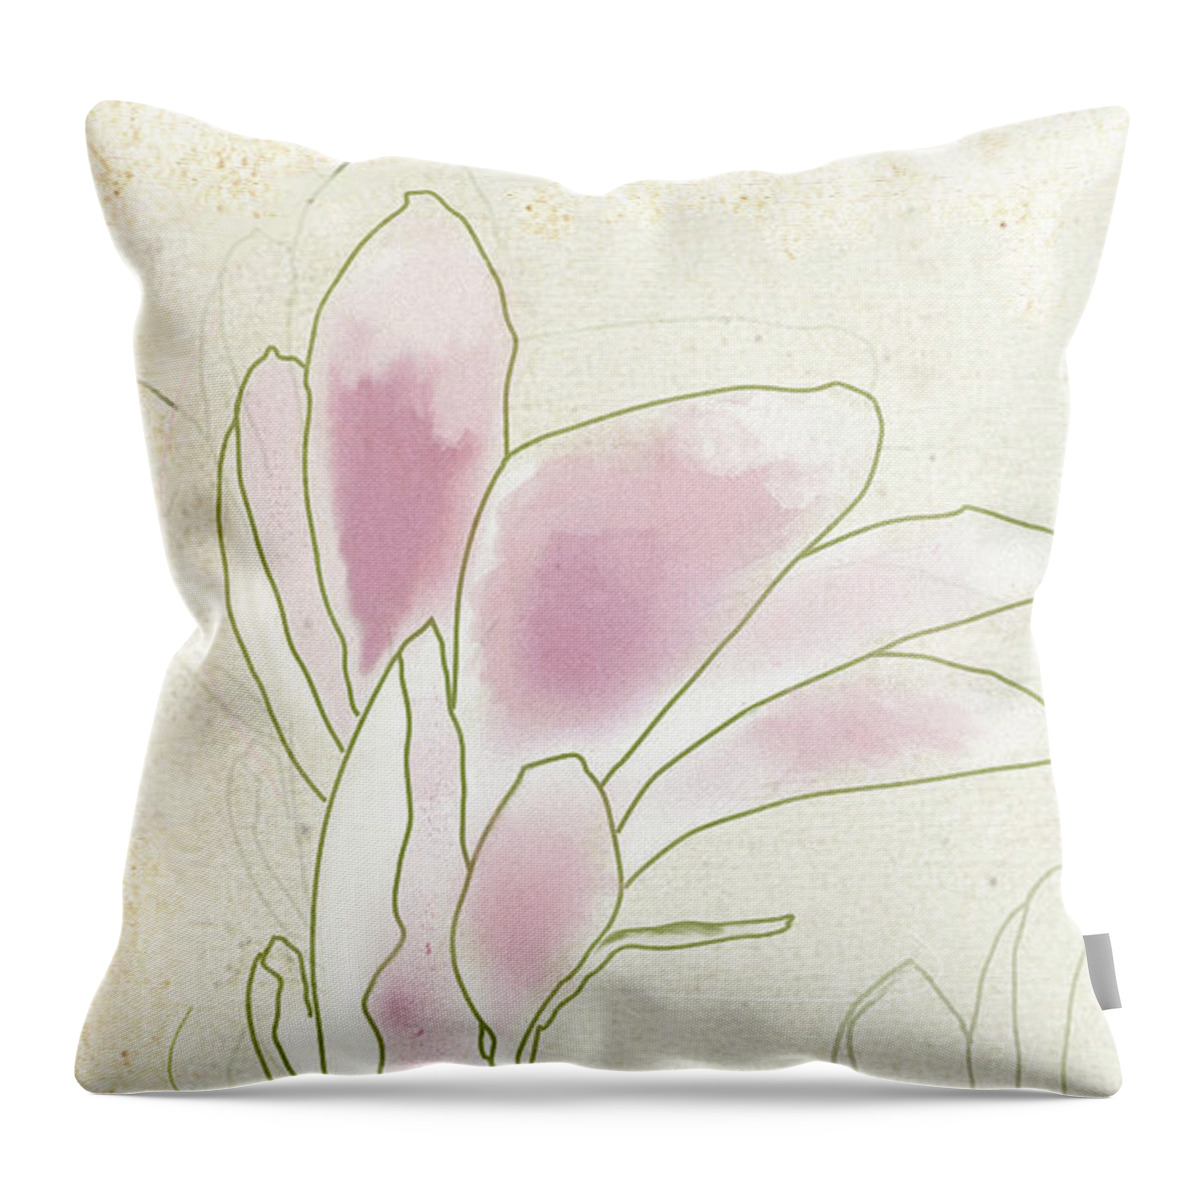 Sketch Throw Pillow featuring the digital art Album Leaf by Gina Harrison